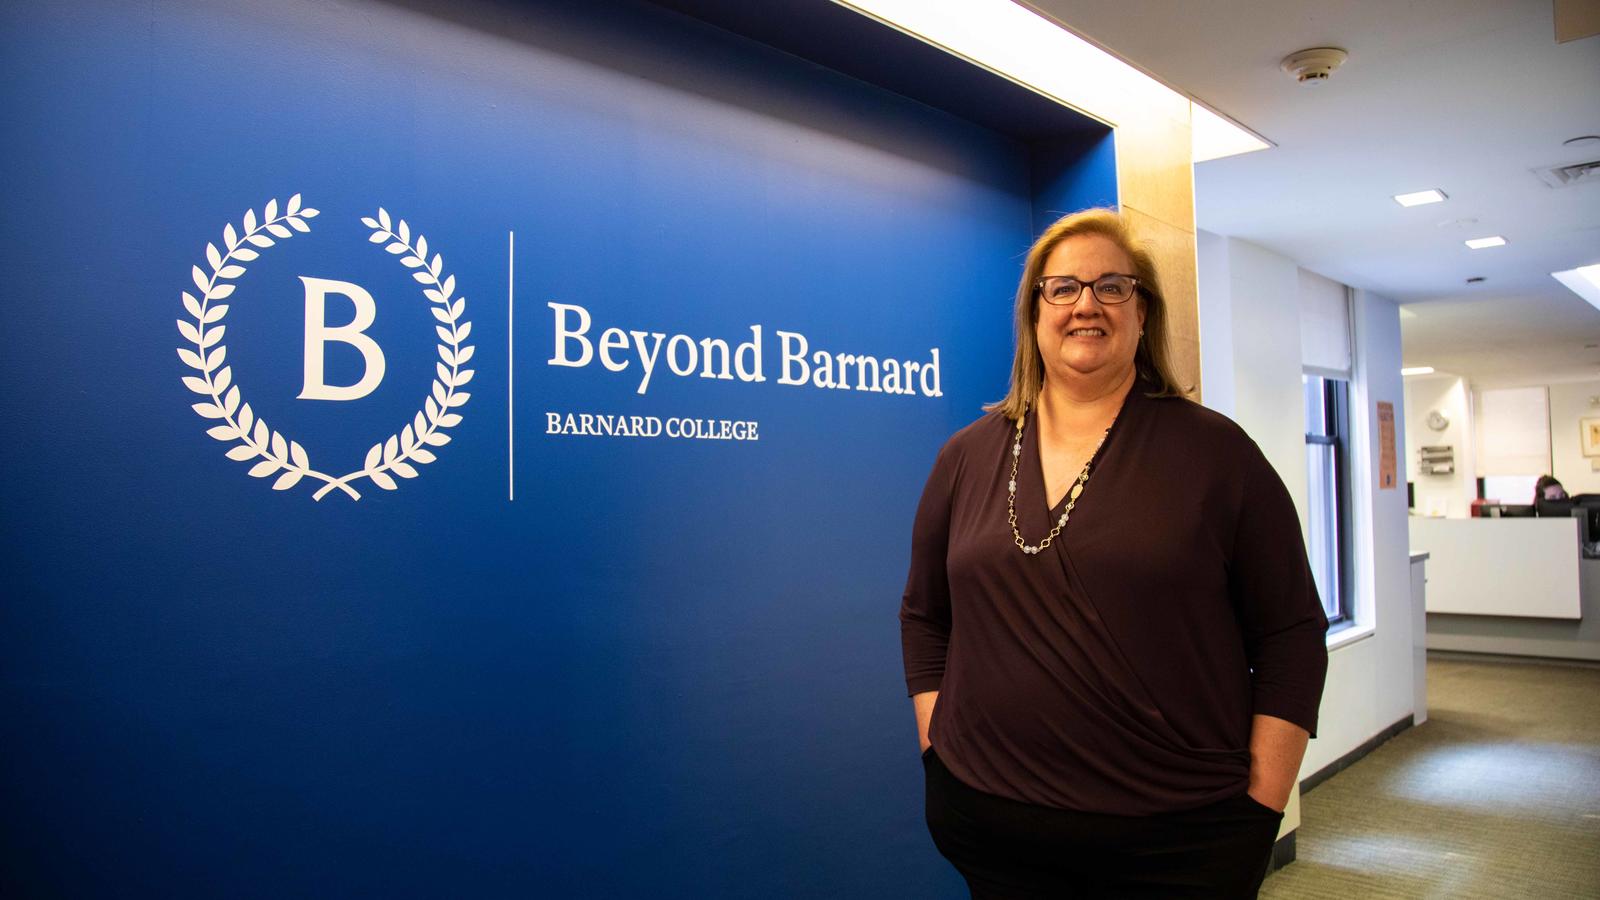 Christine Valenza Shin stands in front of a blue wall with the Beyond Barnard logo on it, located in the Beyond Barnard office